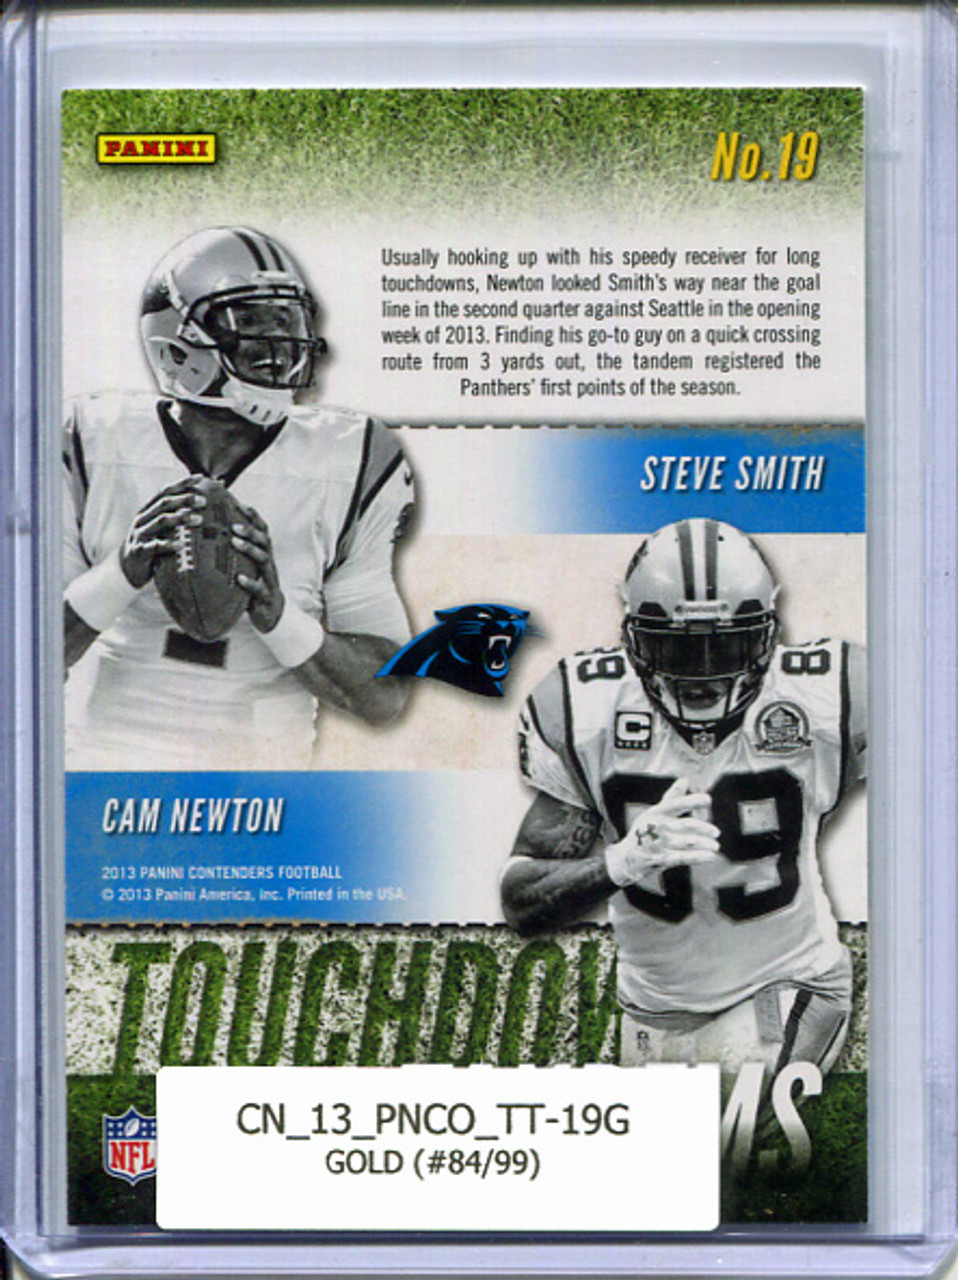 Cam Newton, Steve Smith 2013 Contenders, Touchdown Tandems #19 Gold (#84/99)